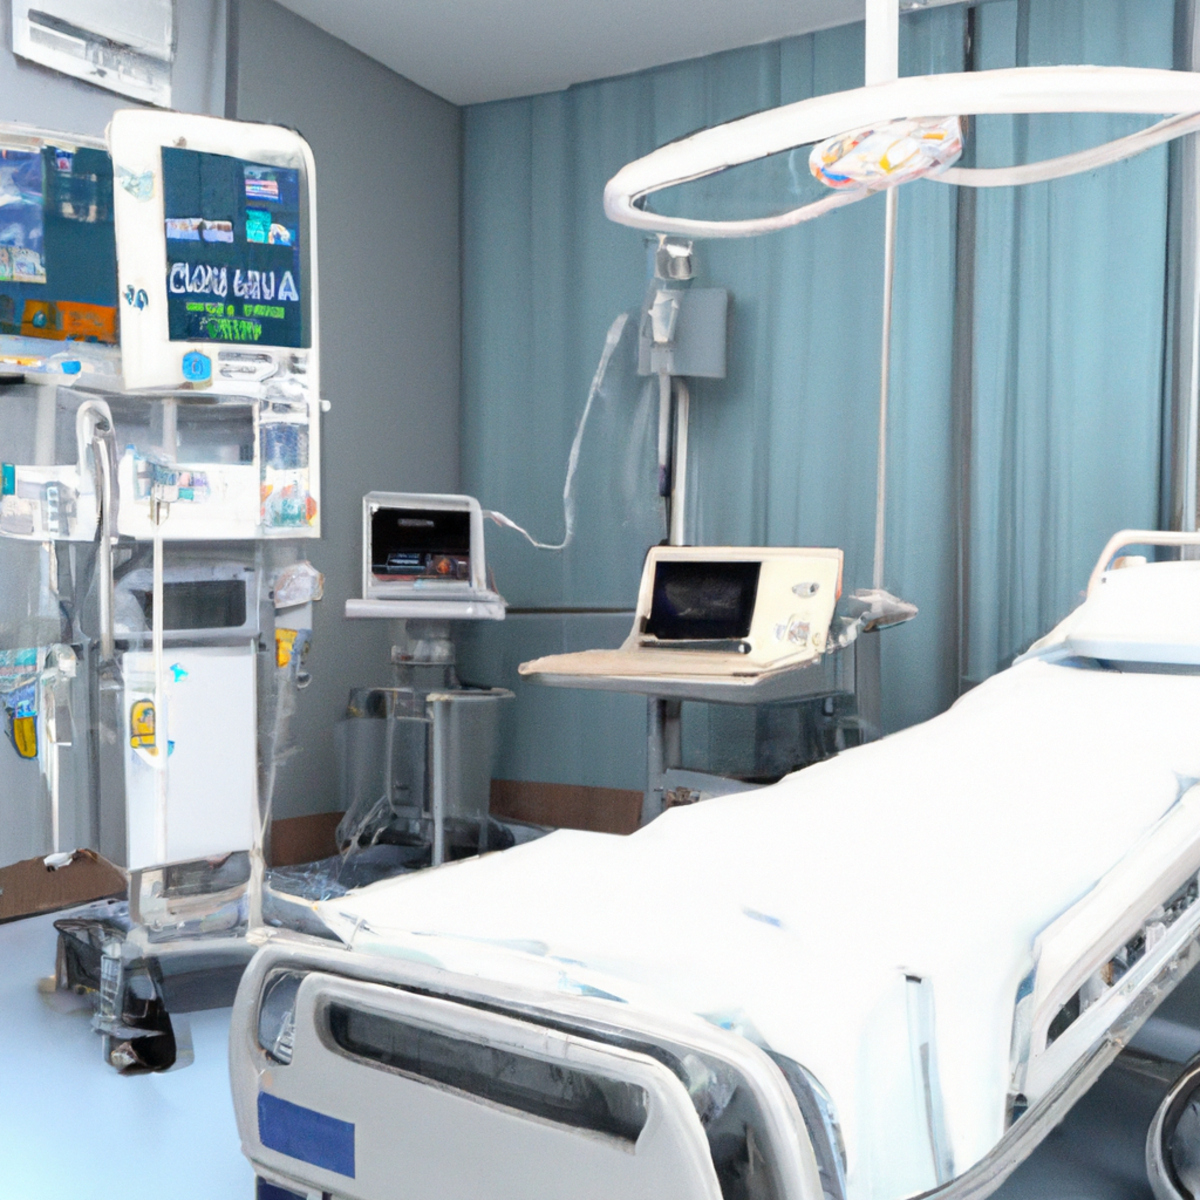 Modern hospital room with state-of-the-art medical device and equipment, showcasing advancements in managing gastroparesis.